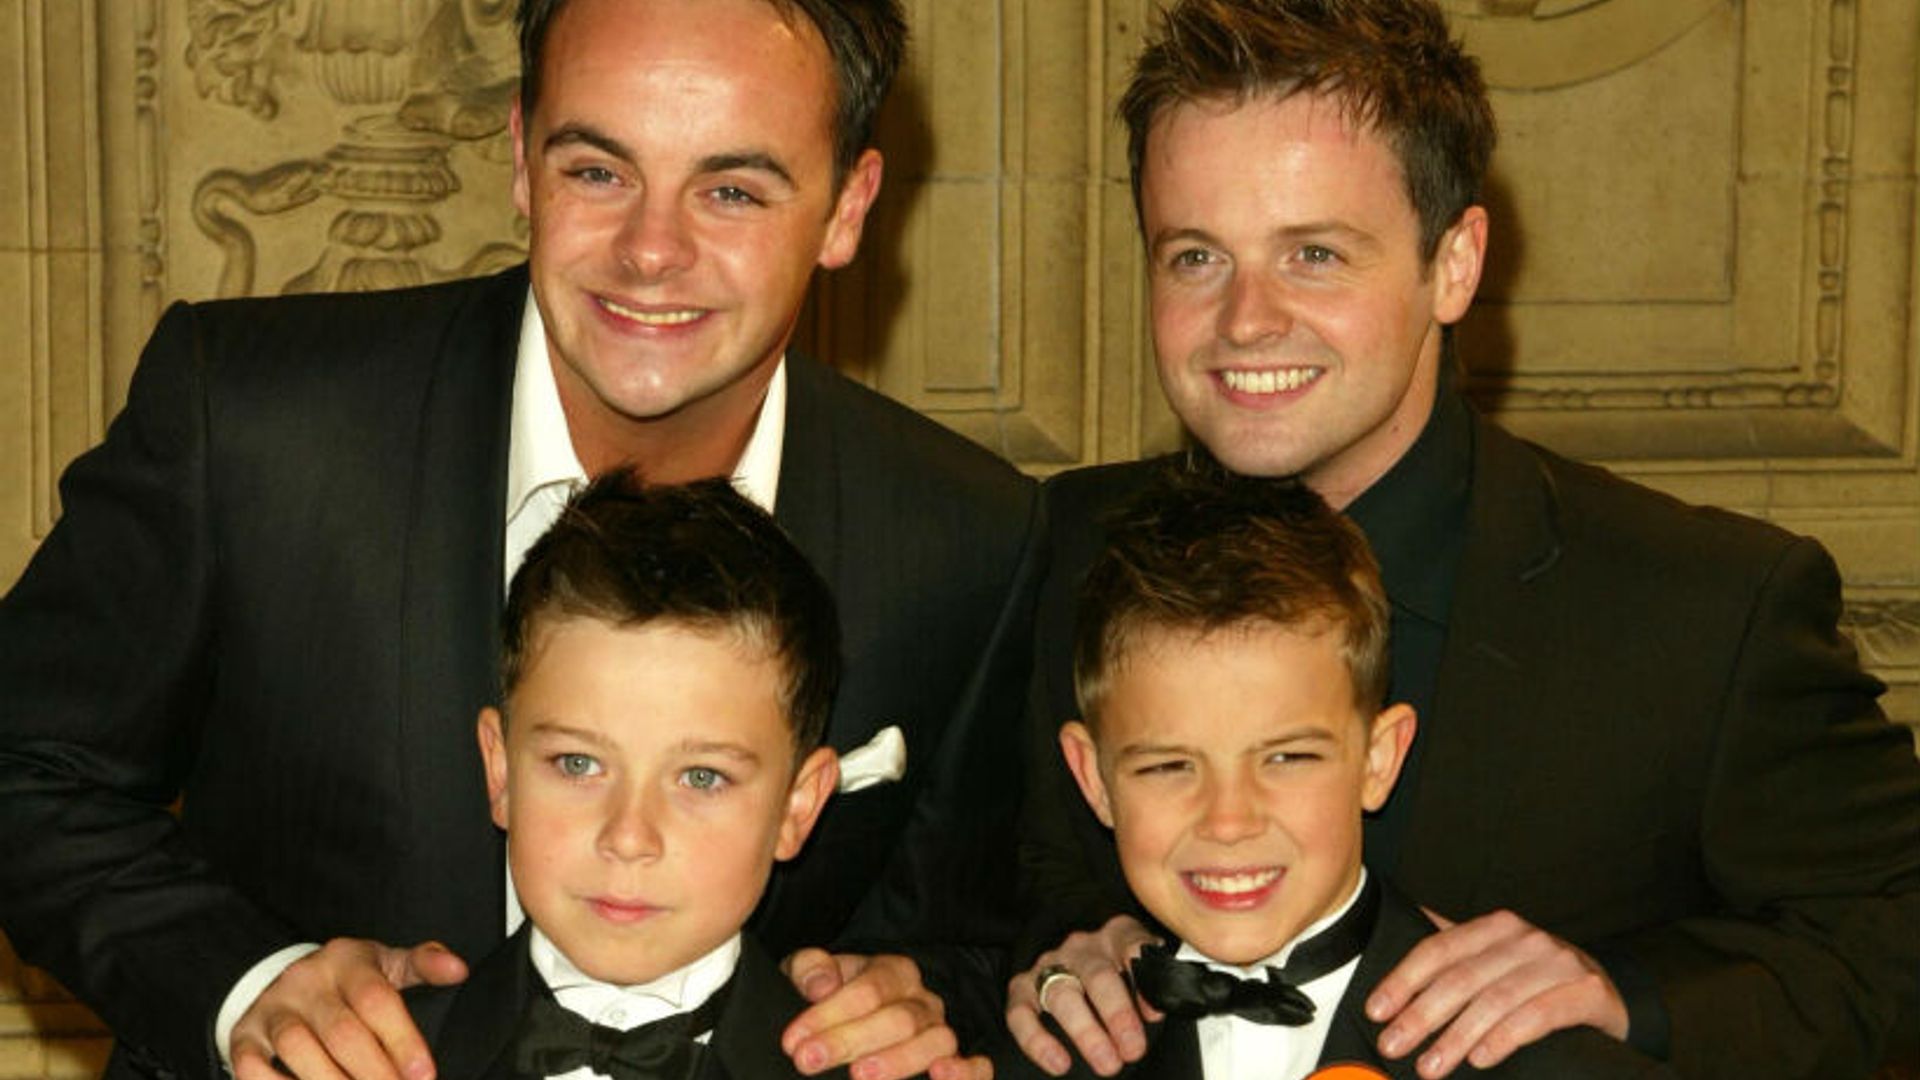 Remember the original Little Ant and Dec? See how grown up they are